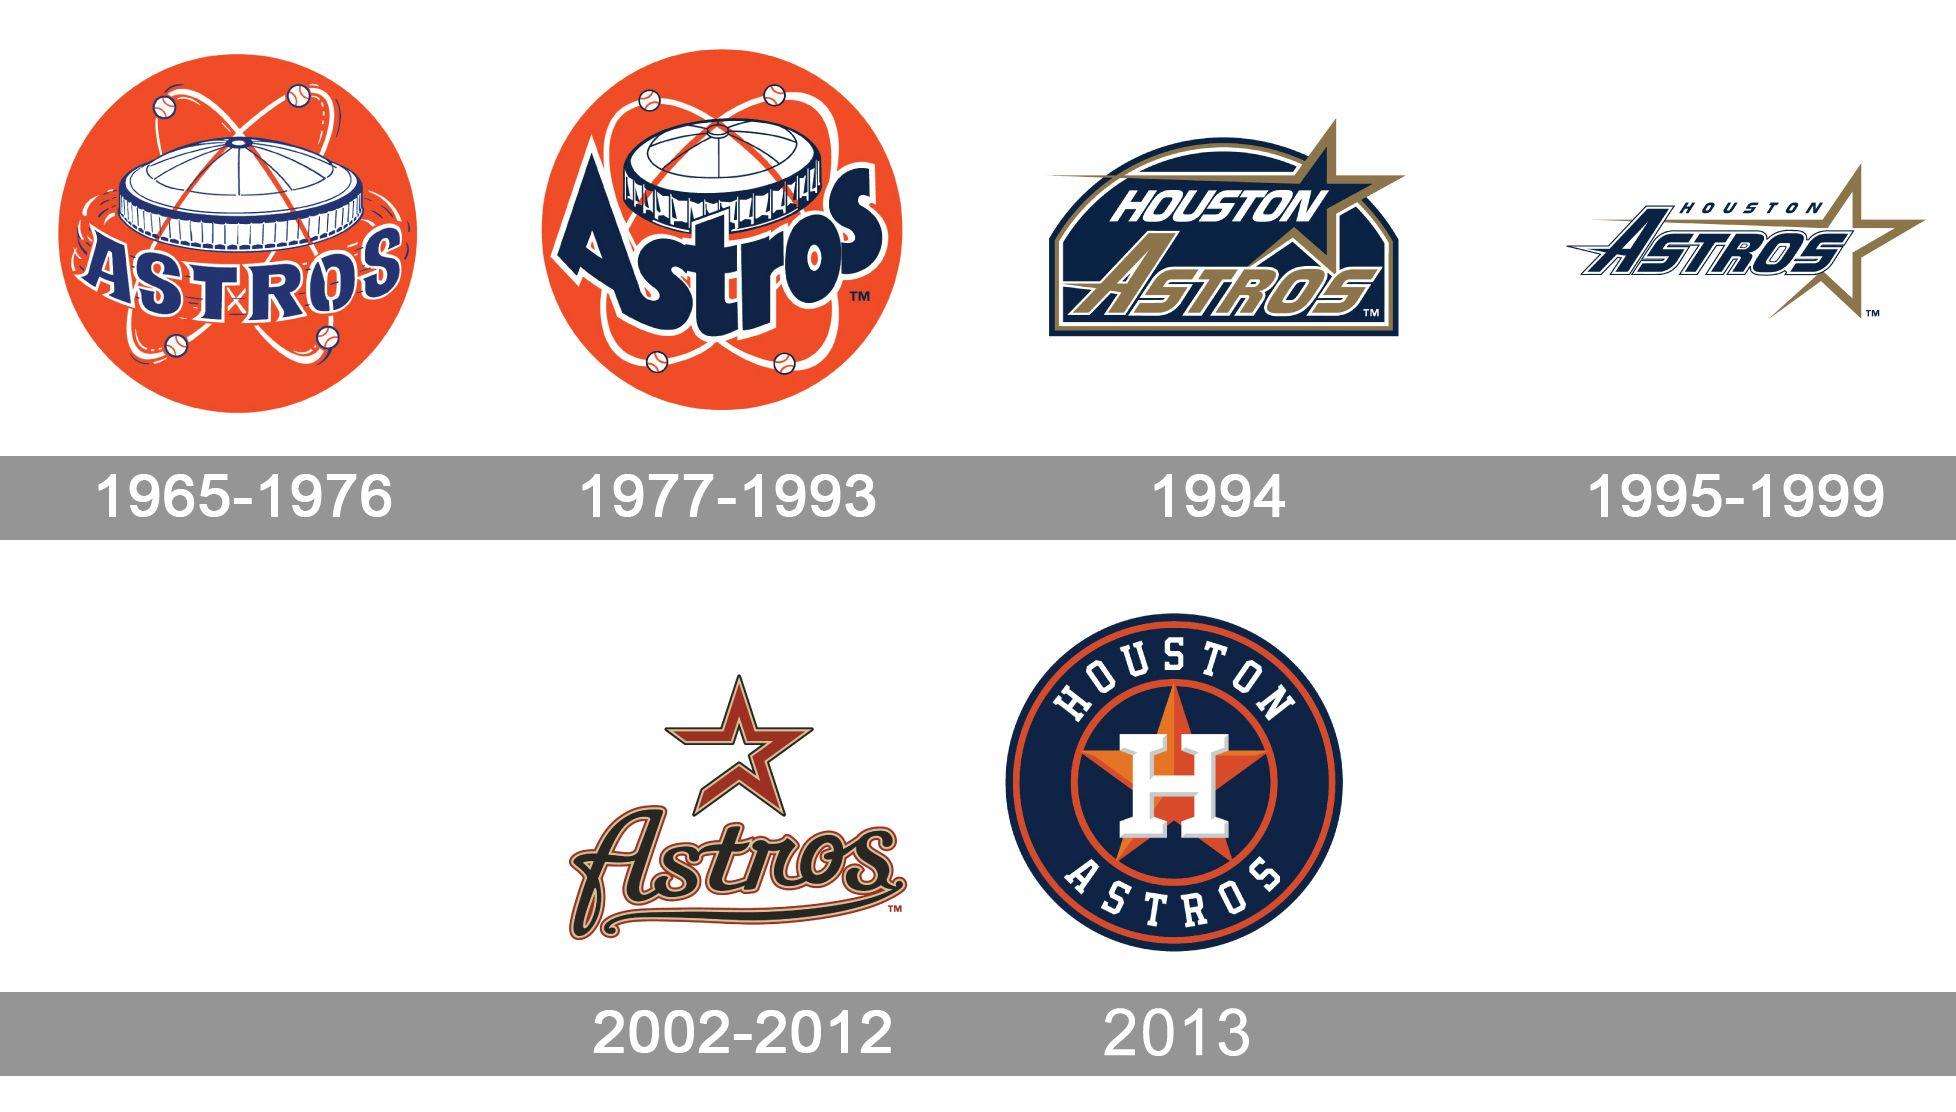 Houston Astros Logo - Houston Astros Logo, Astros Symbol, Meaning, History and Evolution